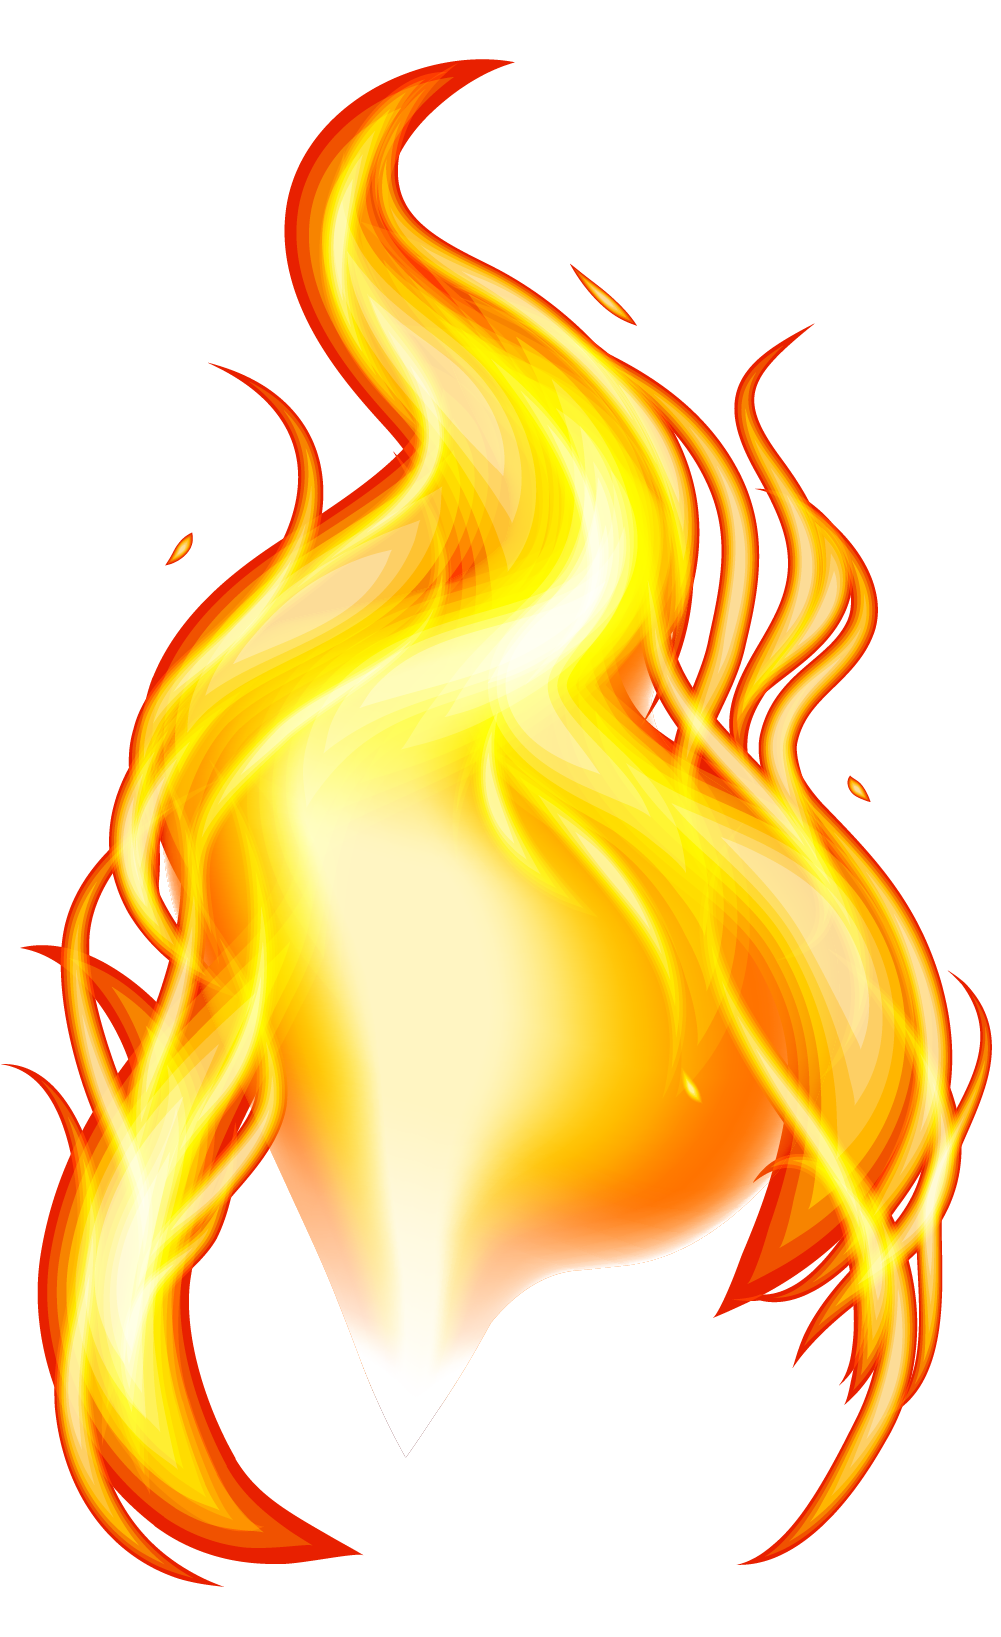 Yellow flame effect element png download - 1001*1637 - Free Transparent